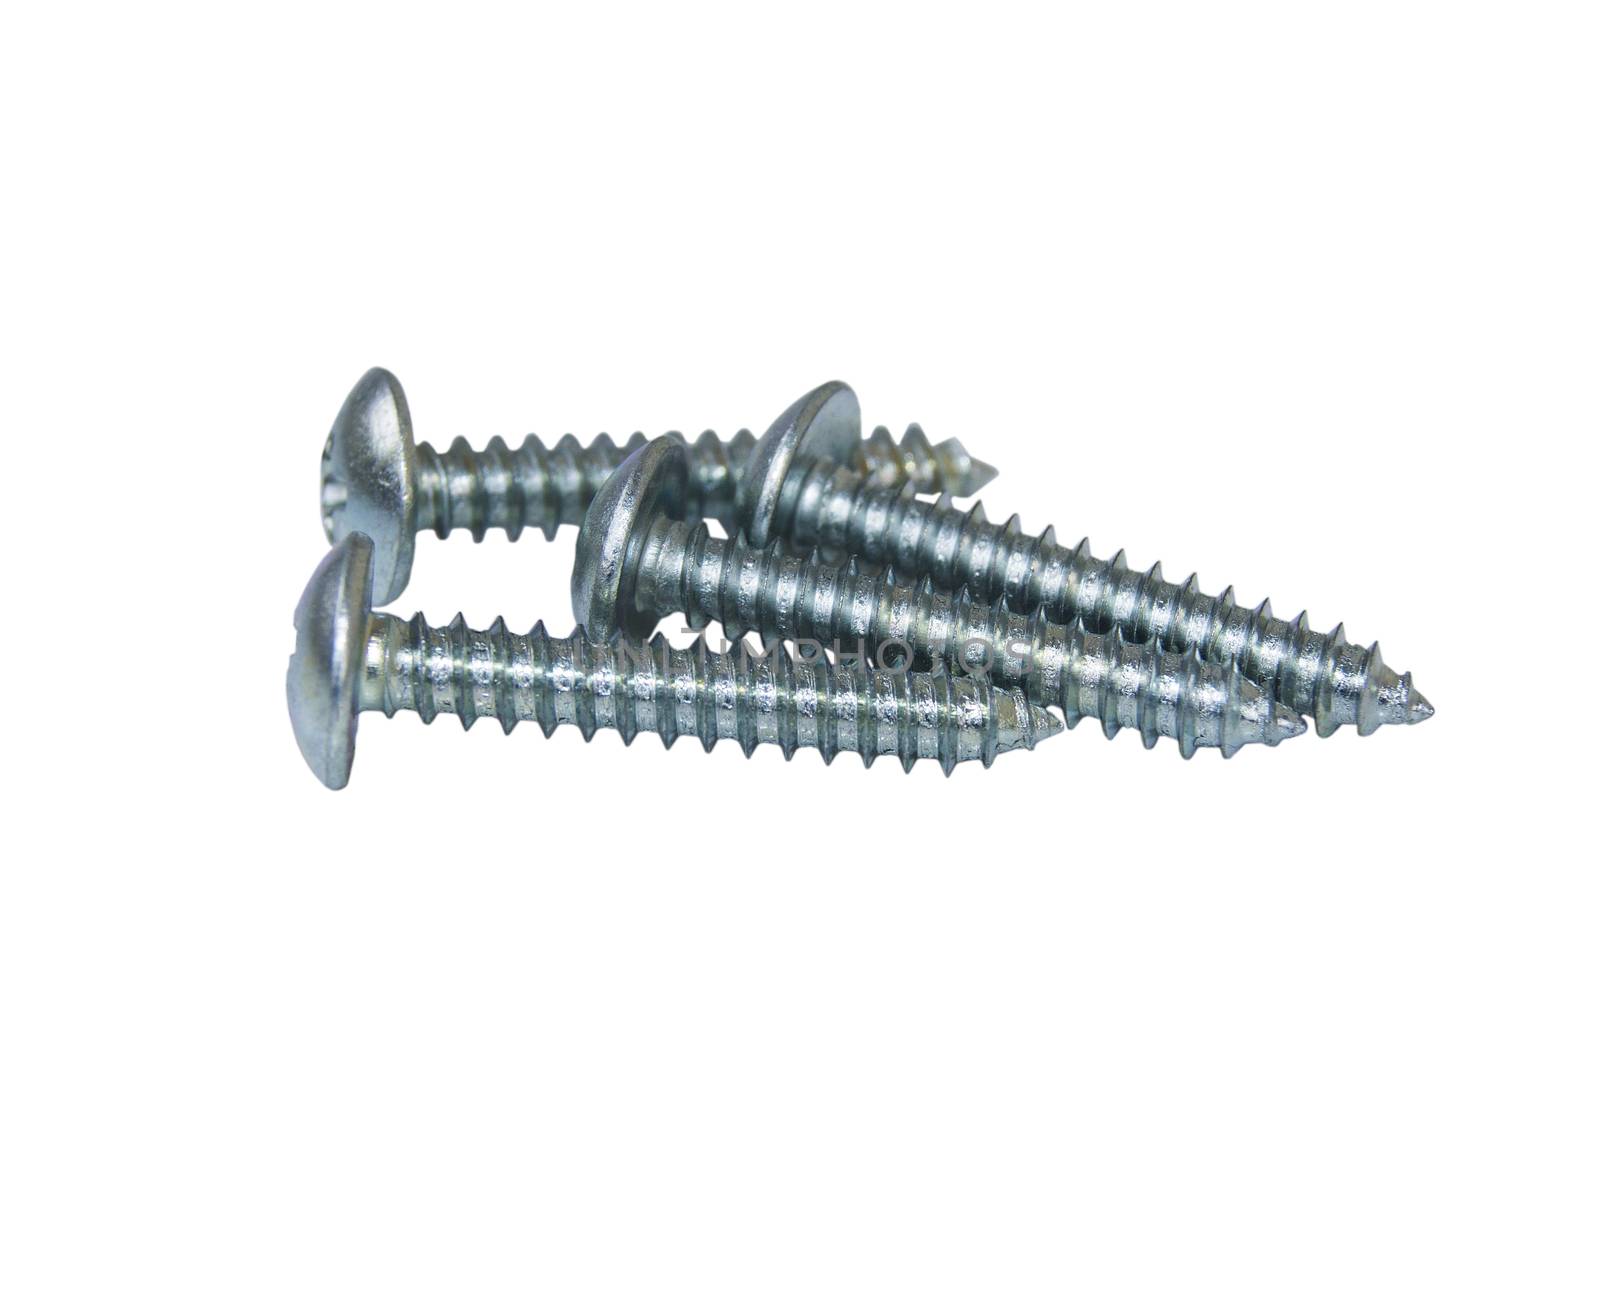 screws. For your commercial and editorial use